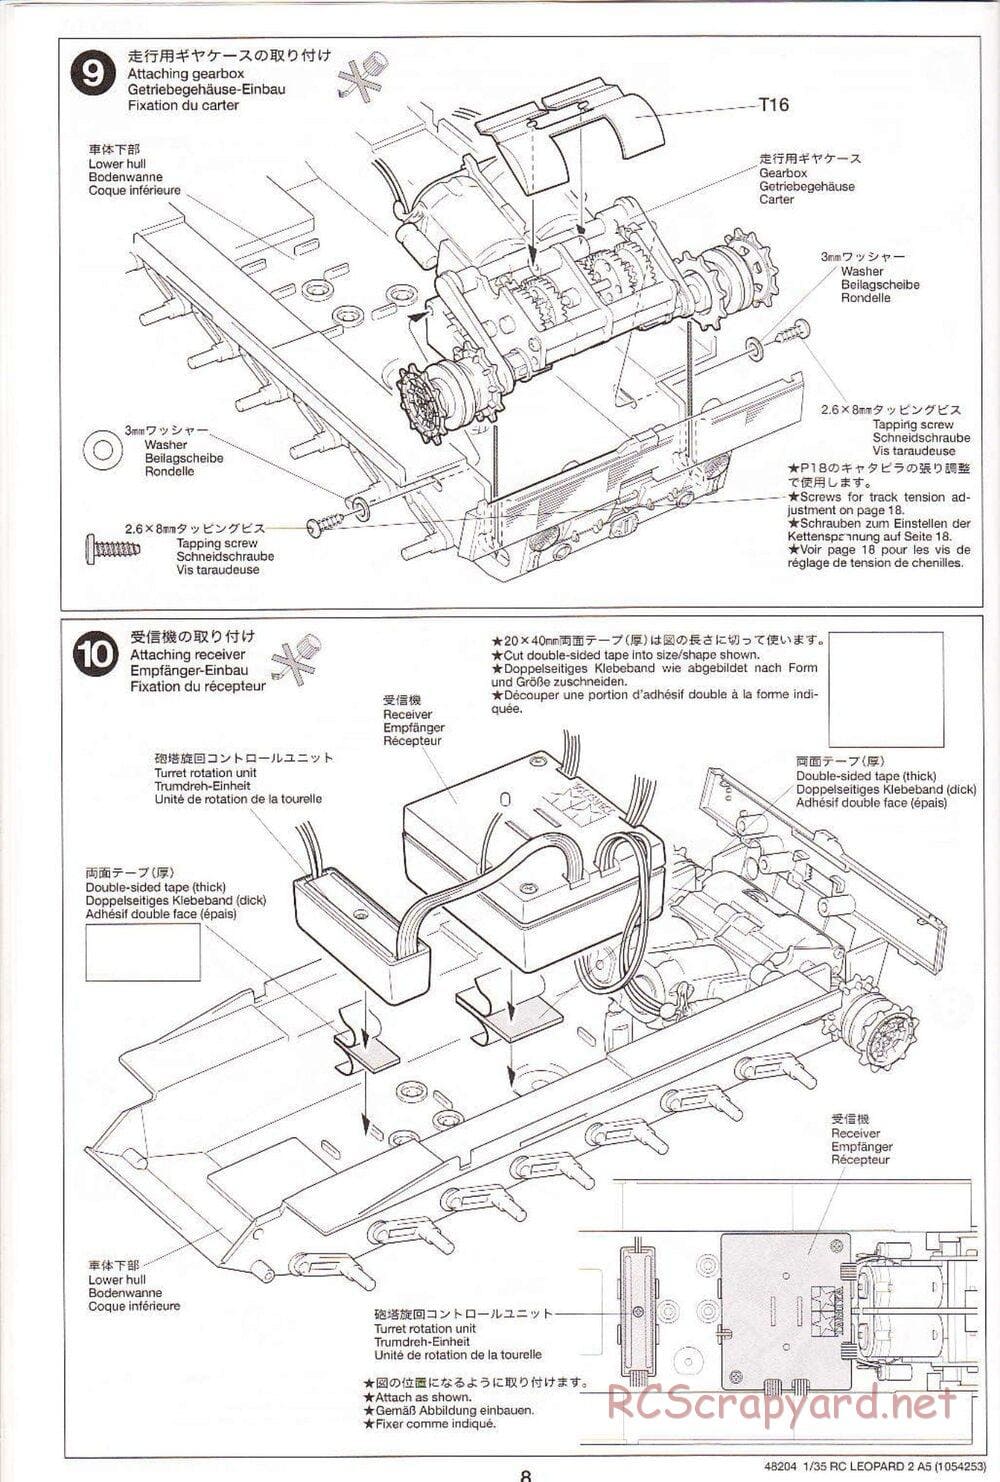 Tamiya - Leopard 2 A5 Main Battle Tank - 1/35 Scale Chassis - Manual - Page 8